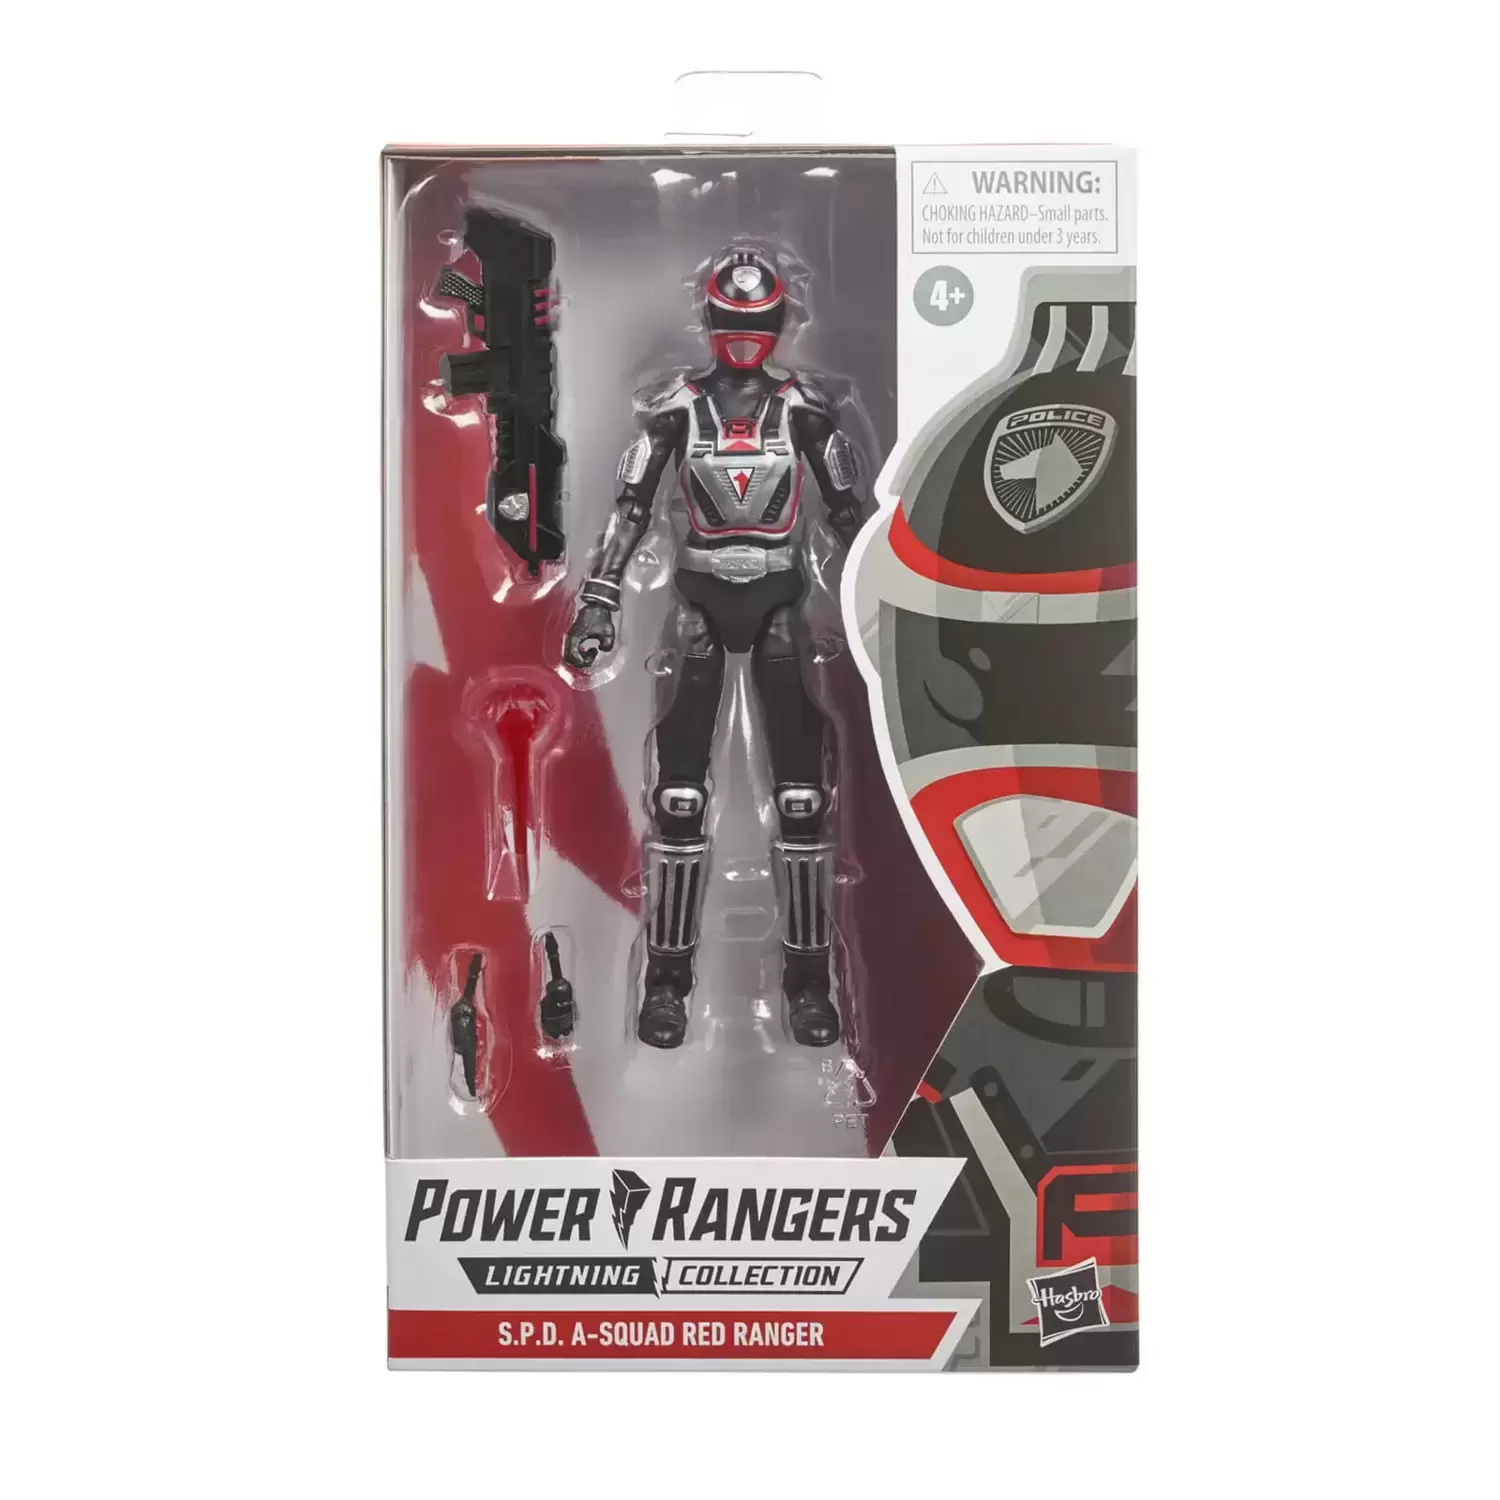 Power Rangers Hasbro - Lightning Collection - S.P.D. A-Squad Red Ranger